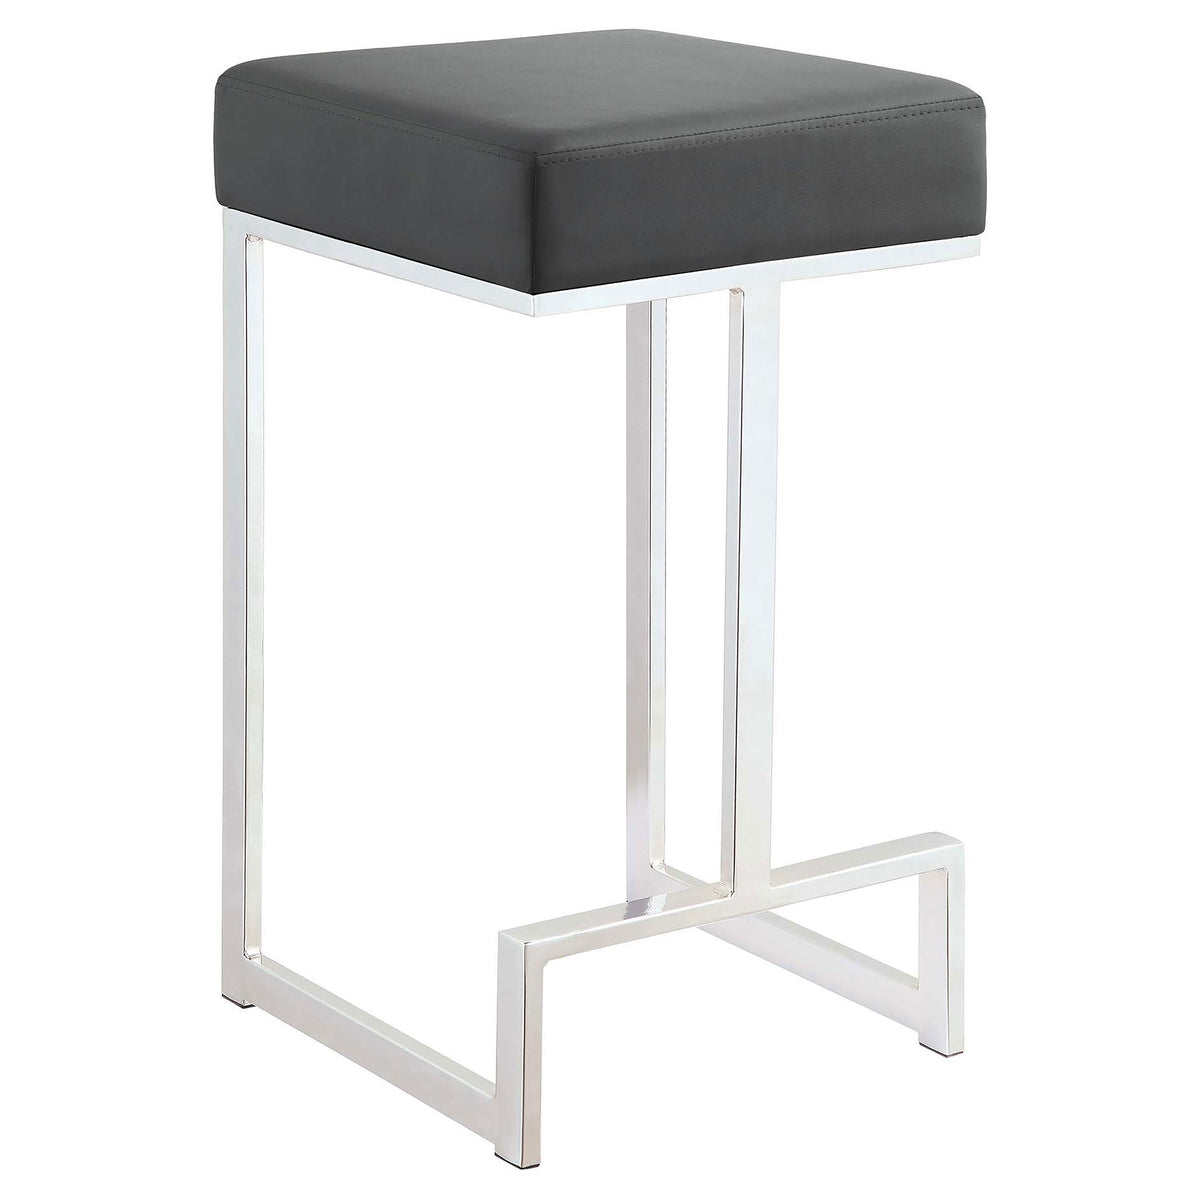 Gervase Square Counter Height Stool Grey and Chrome  Las Vegas Furniture Stores